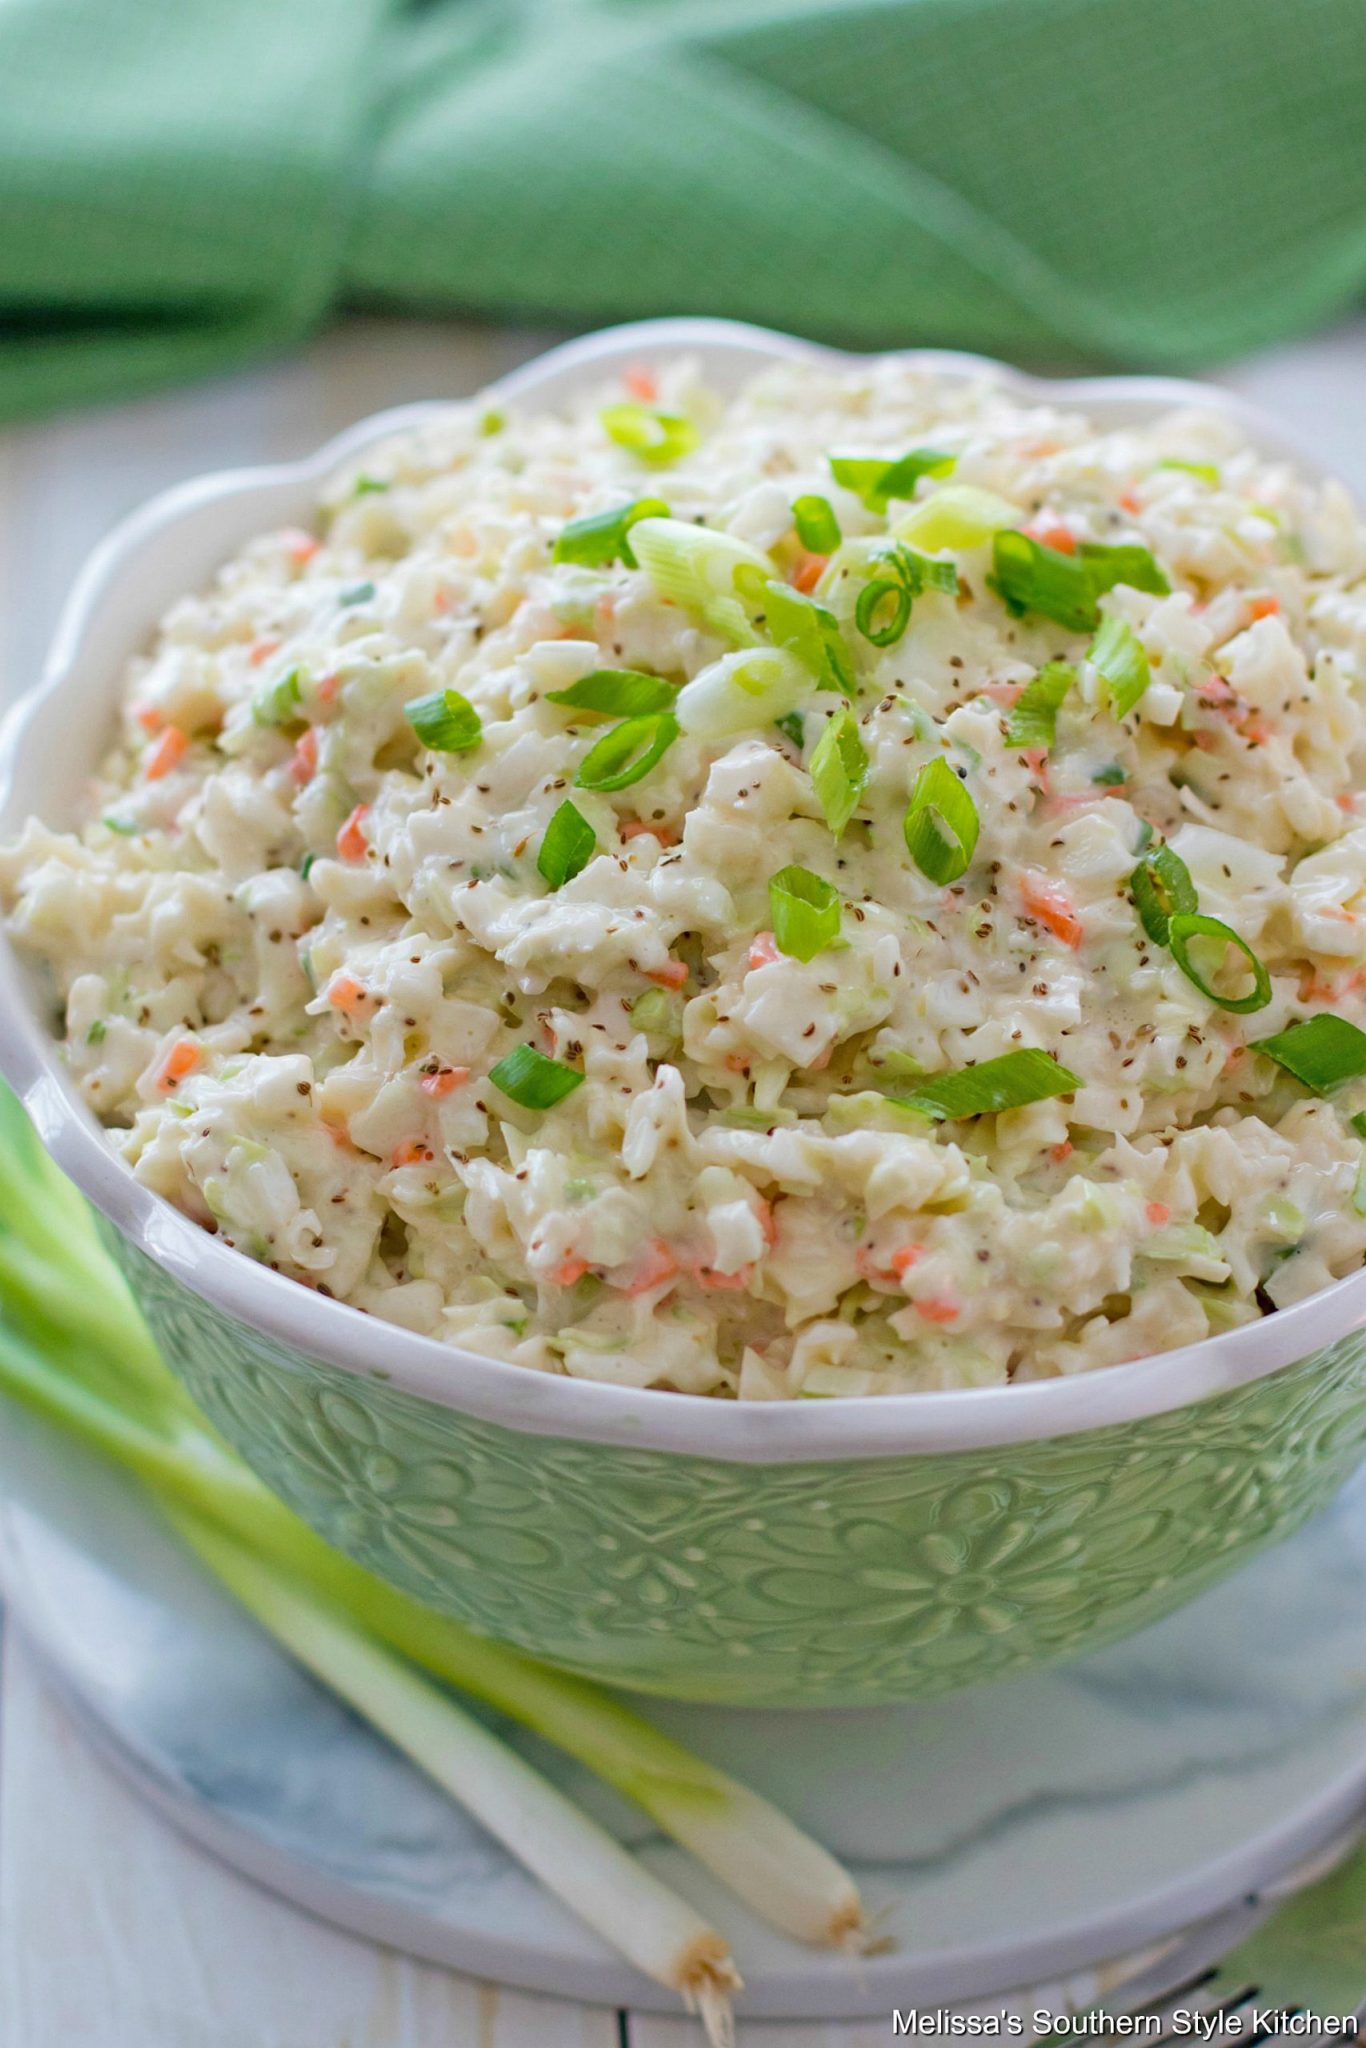 Southern Style Cole Slaw